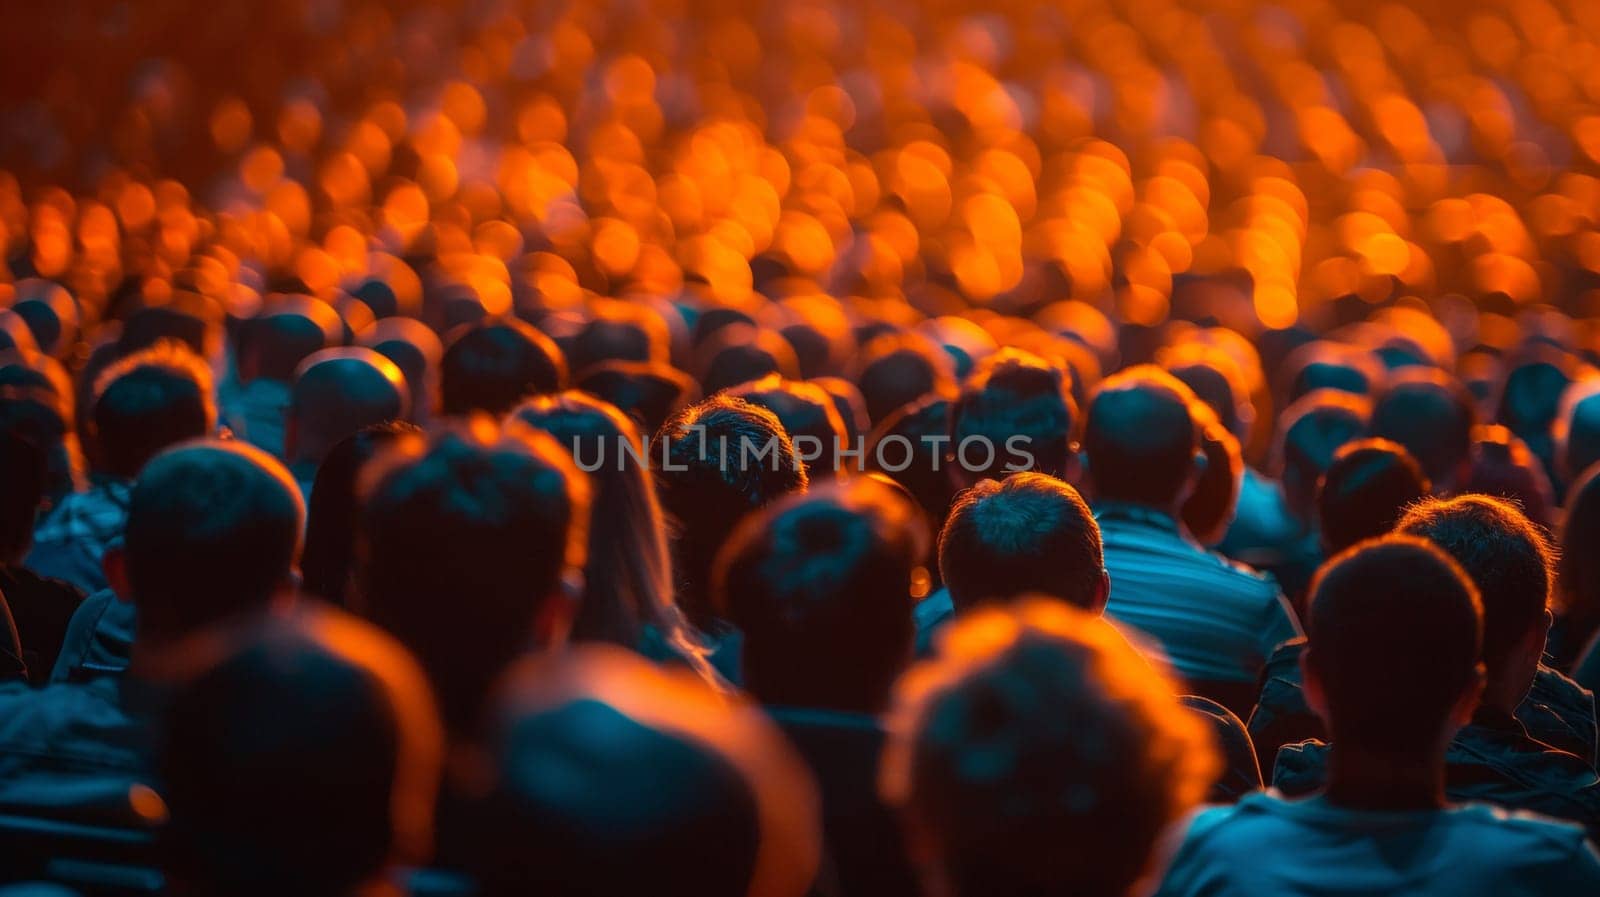 A group of people are sitting in a crowd at an event